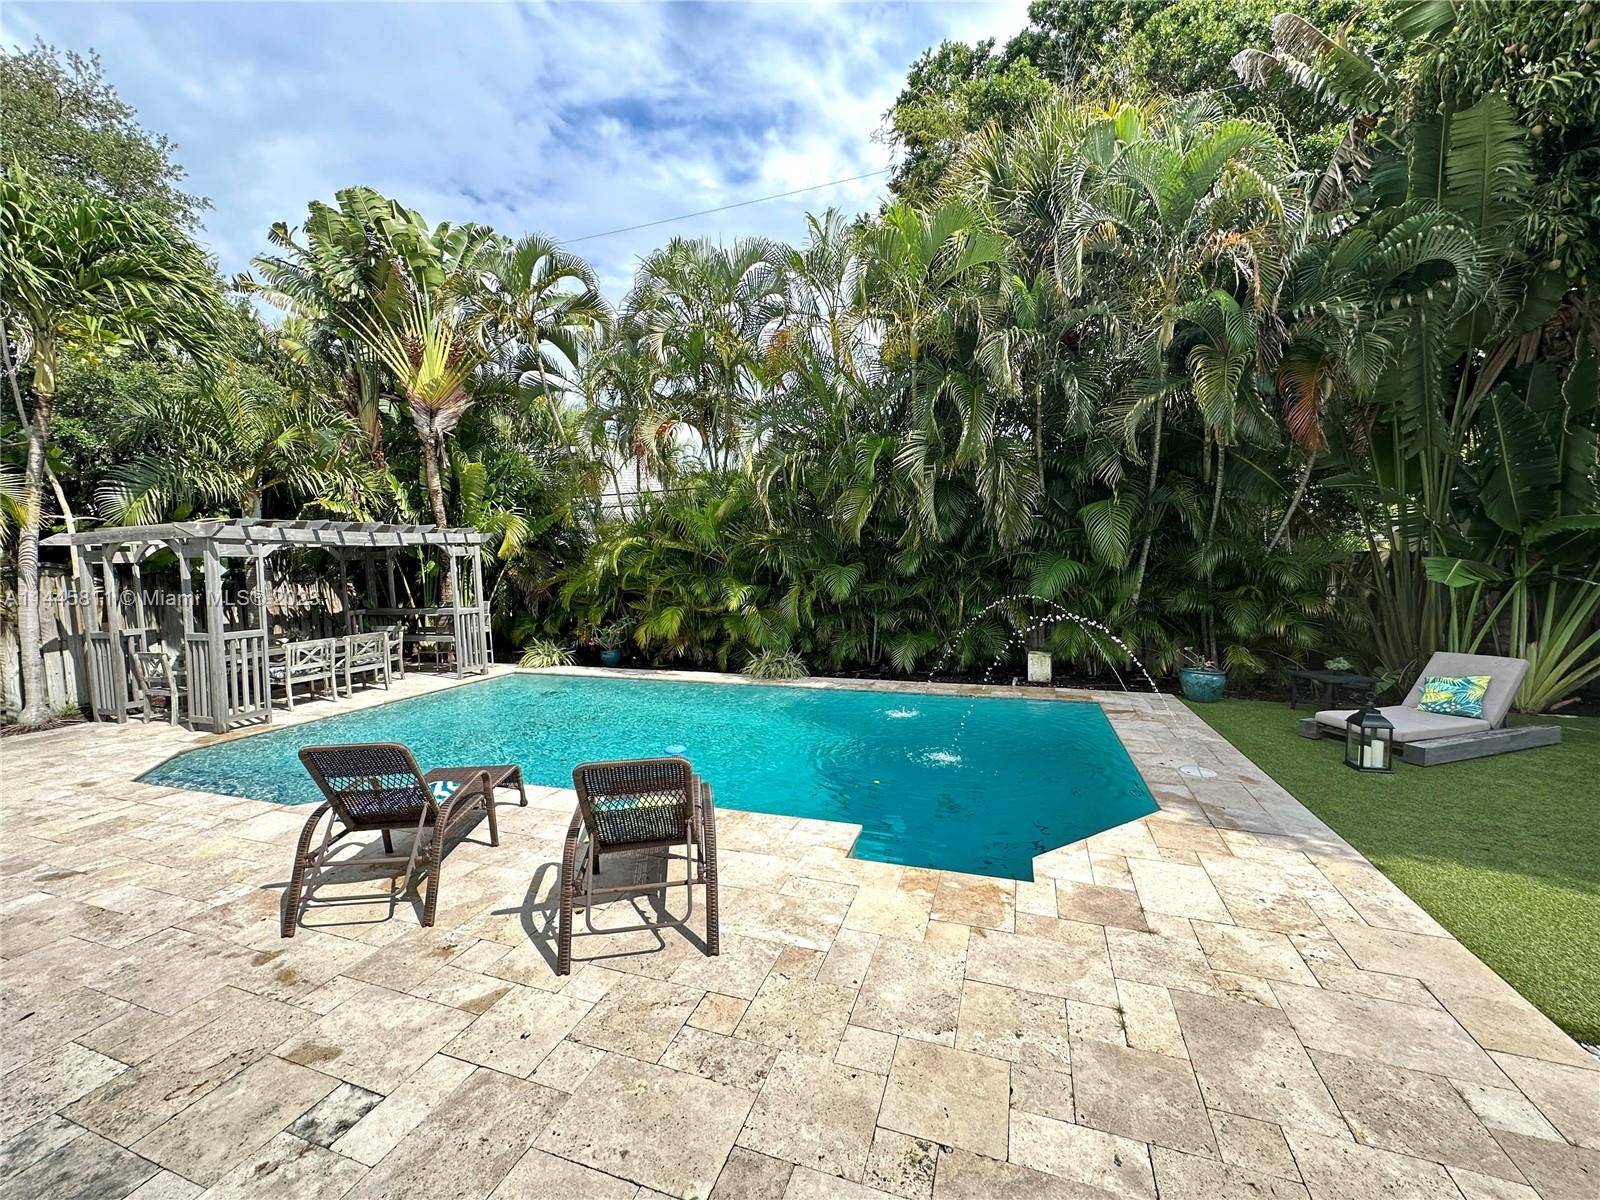 Come in, and welcome to this beautifully renovated home located minutes from the best of everything in highly desirable Wilton Manors.